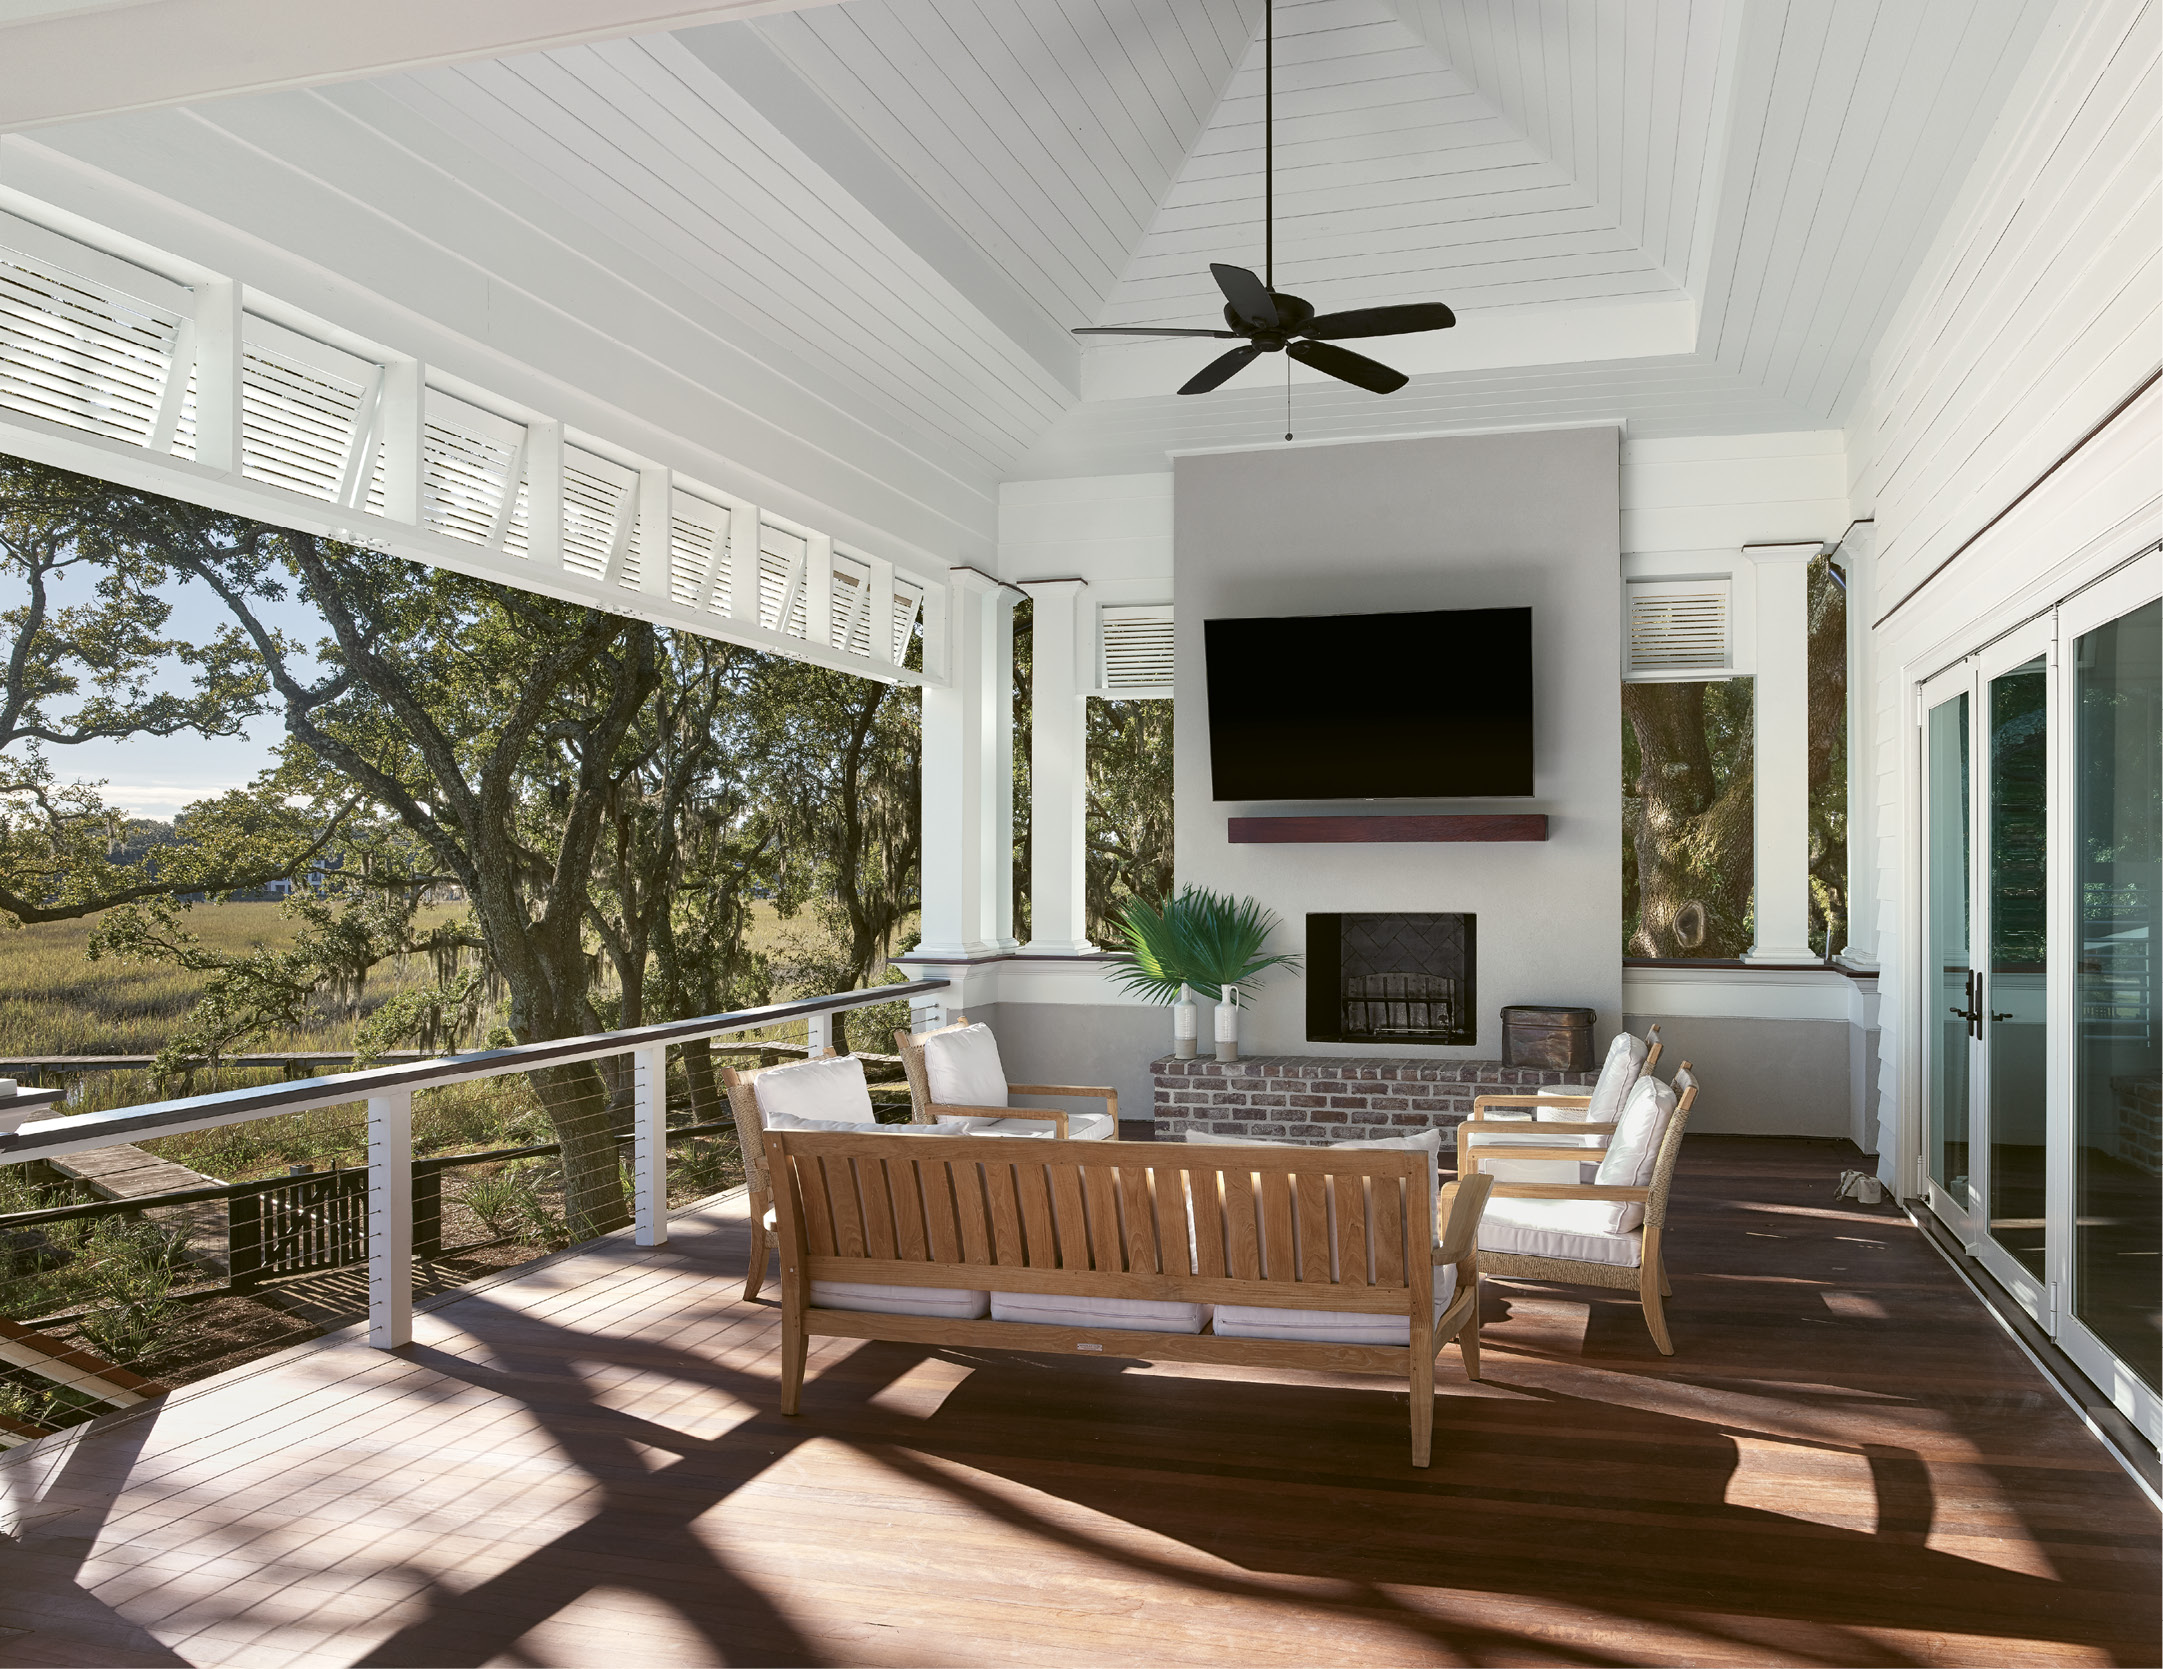 The upstairs living area is a quieter place for family and friends to gather for sunsets or to watch the big game.